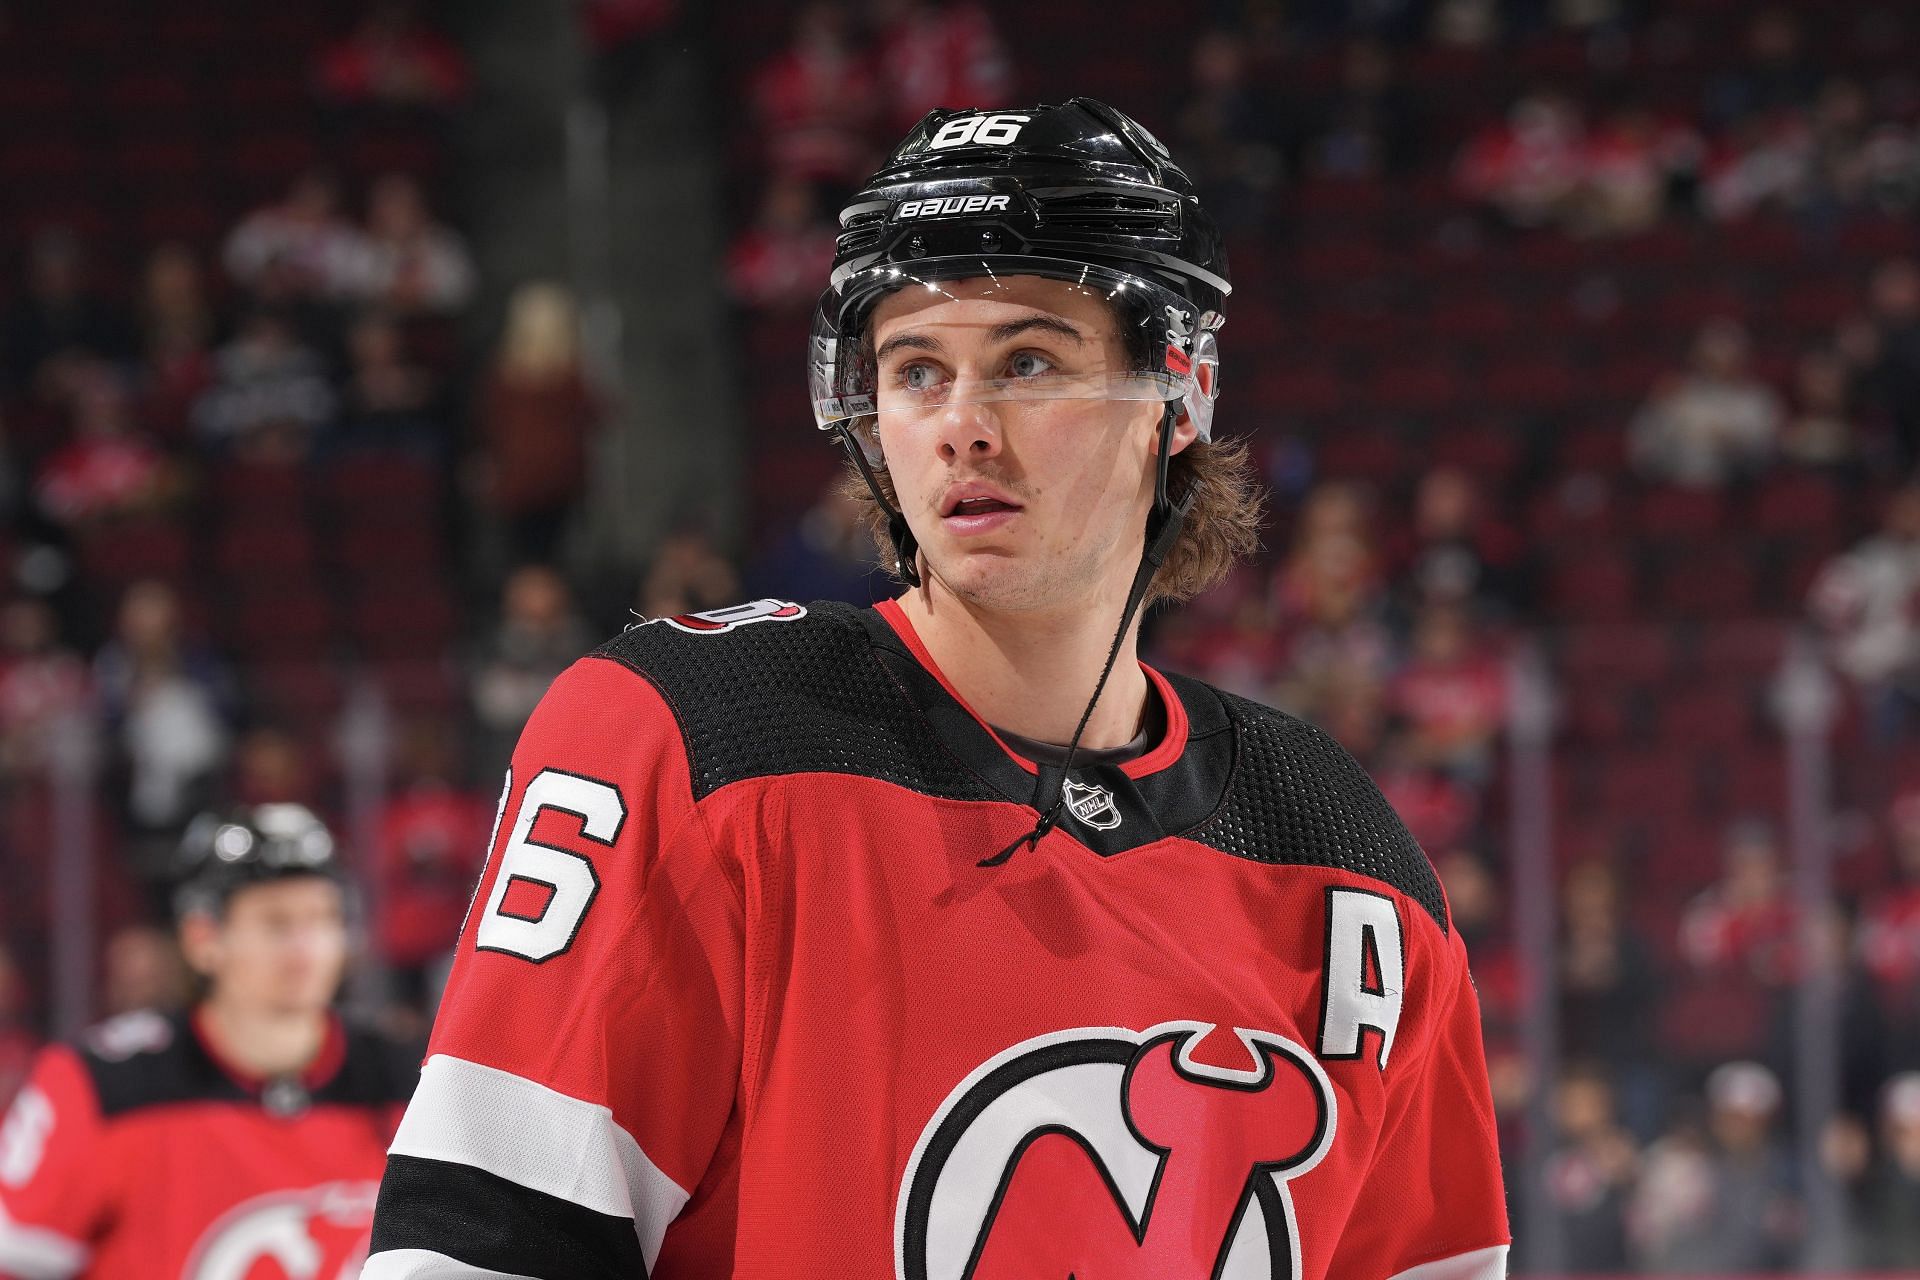 Thank You, 2022-23 New Jersey Devils, for Making Your Season